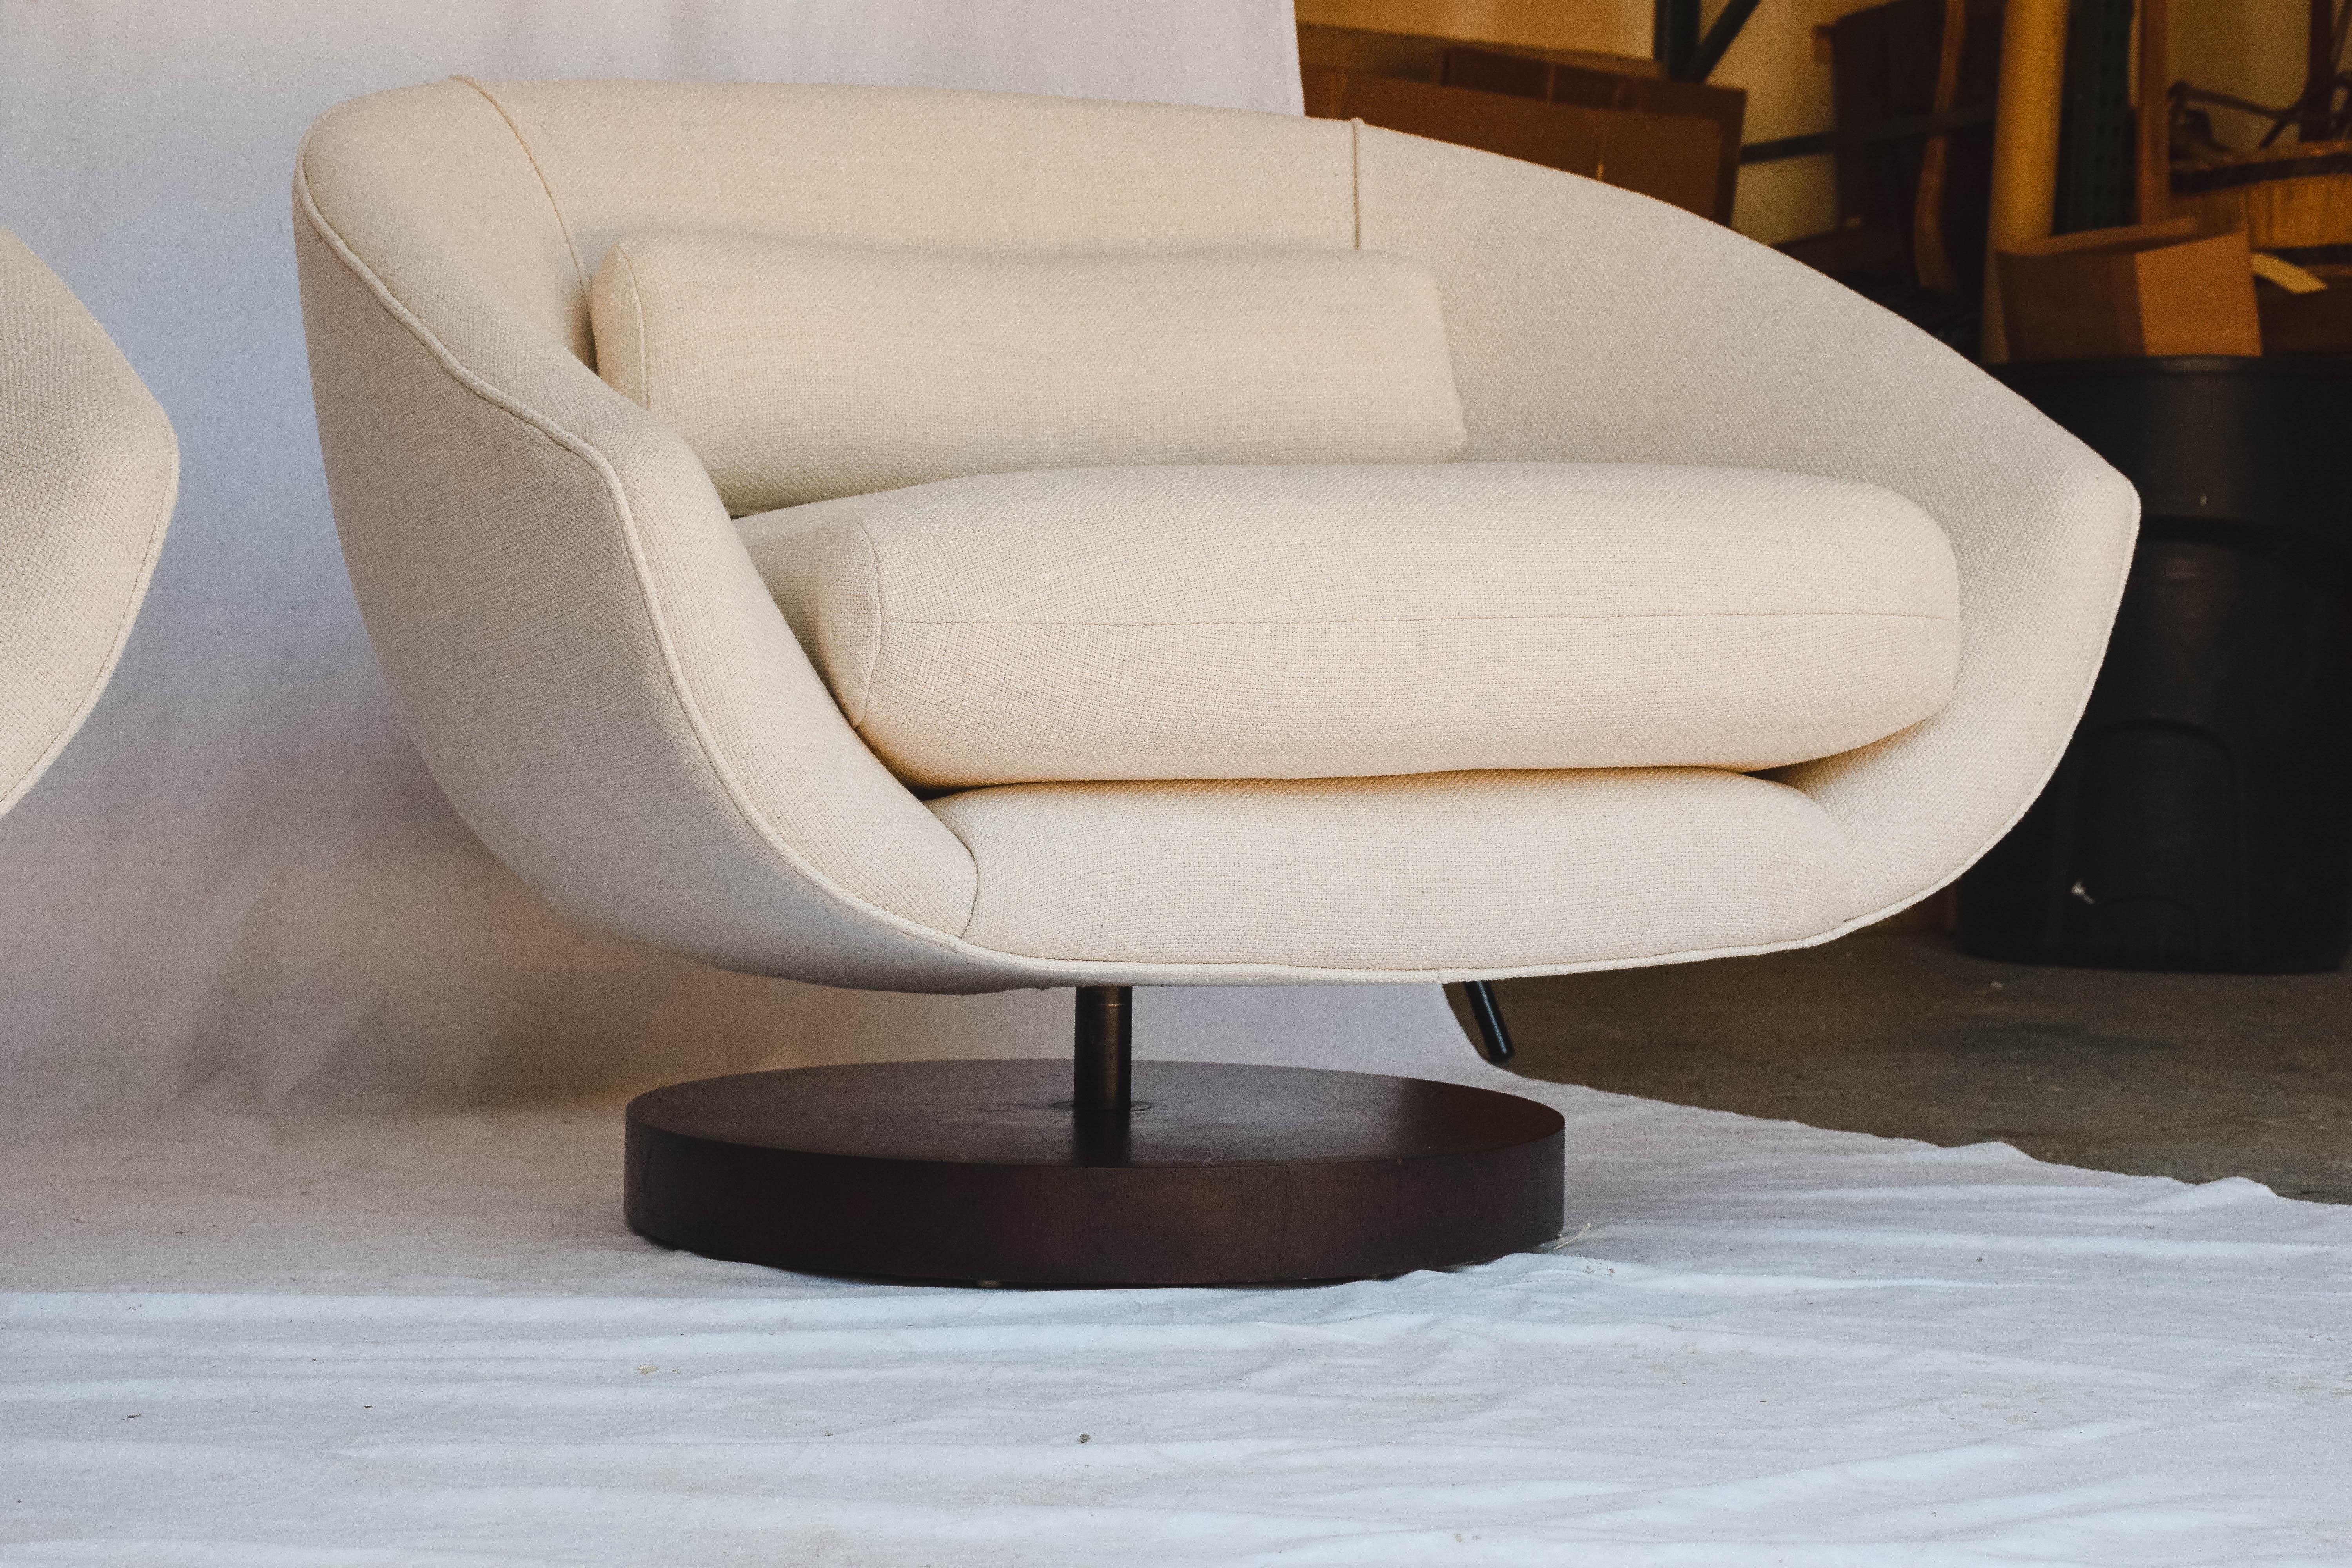 American Pair of Mid-Century Modern Swivel Chairs, in the style of Milo Baughman